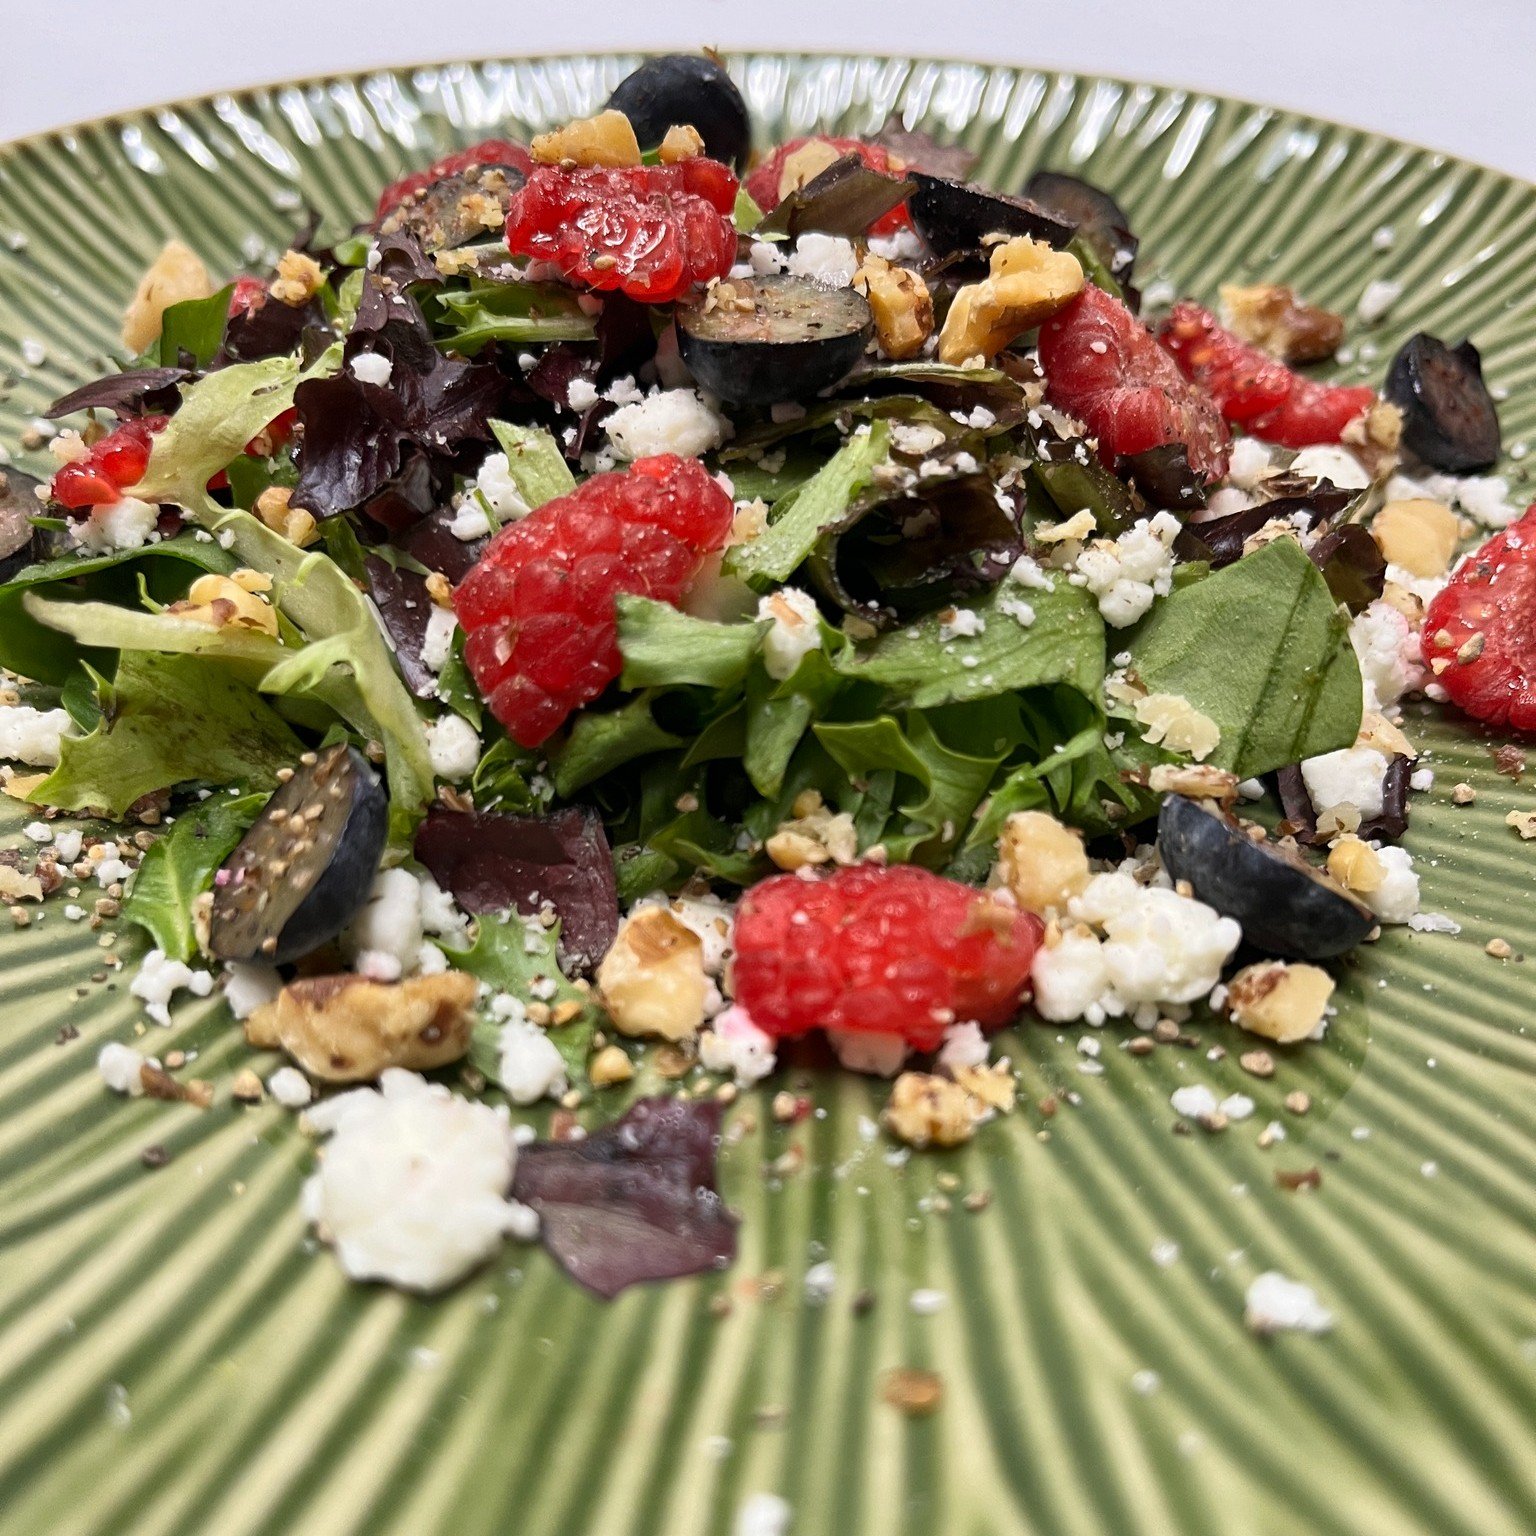 🥗Indulge in our irresistible salads that have our regulars raving! 🥗

Fresh mixed greens, a burst of fruit, cheese, toasted nuts, and drizzled with our  house vinaigrette, each bite is a symphony of flavors and textures. 

Join us today and experie